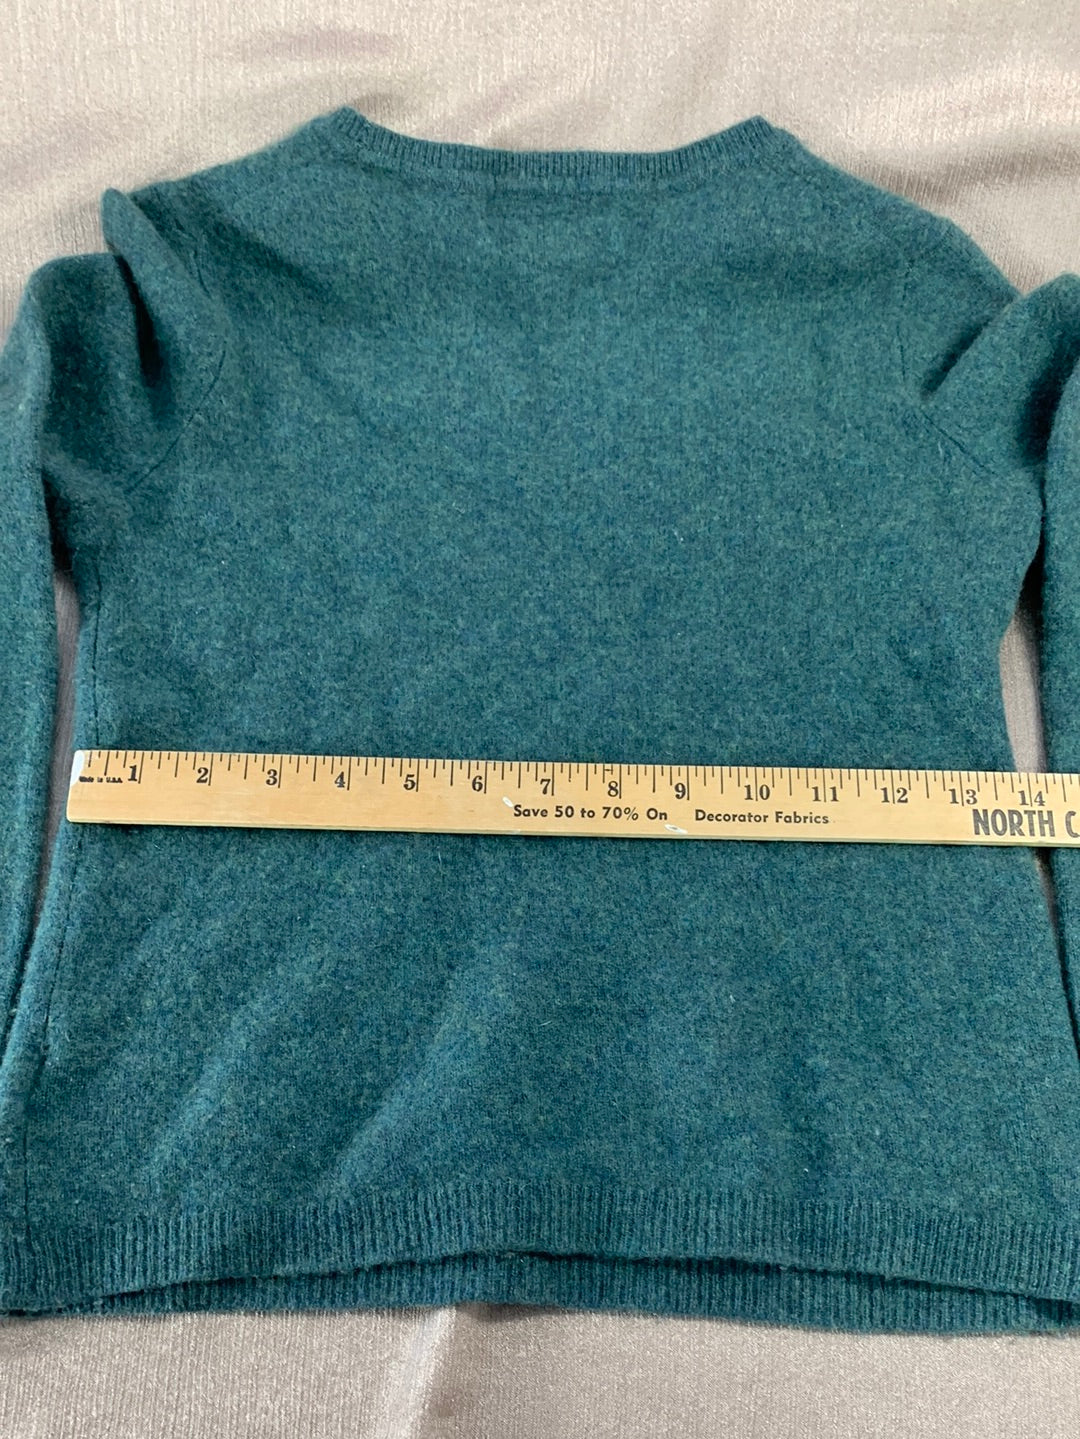 LOT OF 3 CASHMERE Sweater Upcycle Felt Craft Cutters Fabric - teal grey